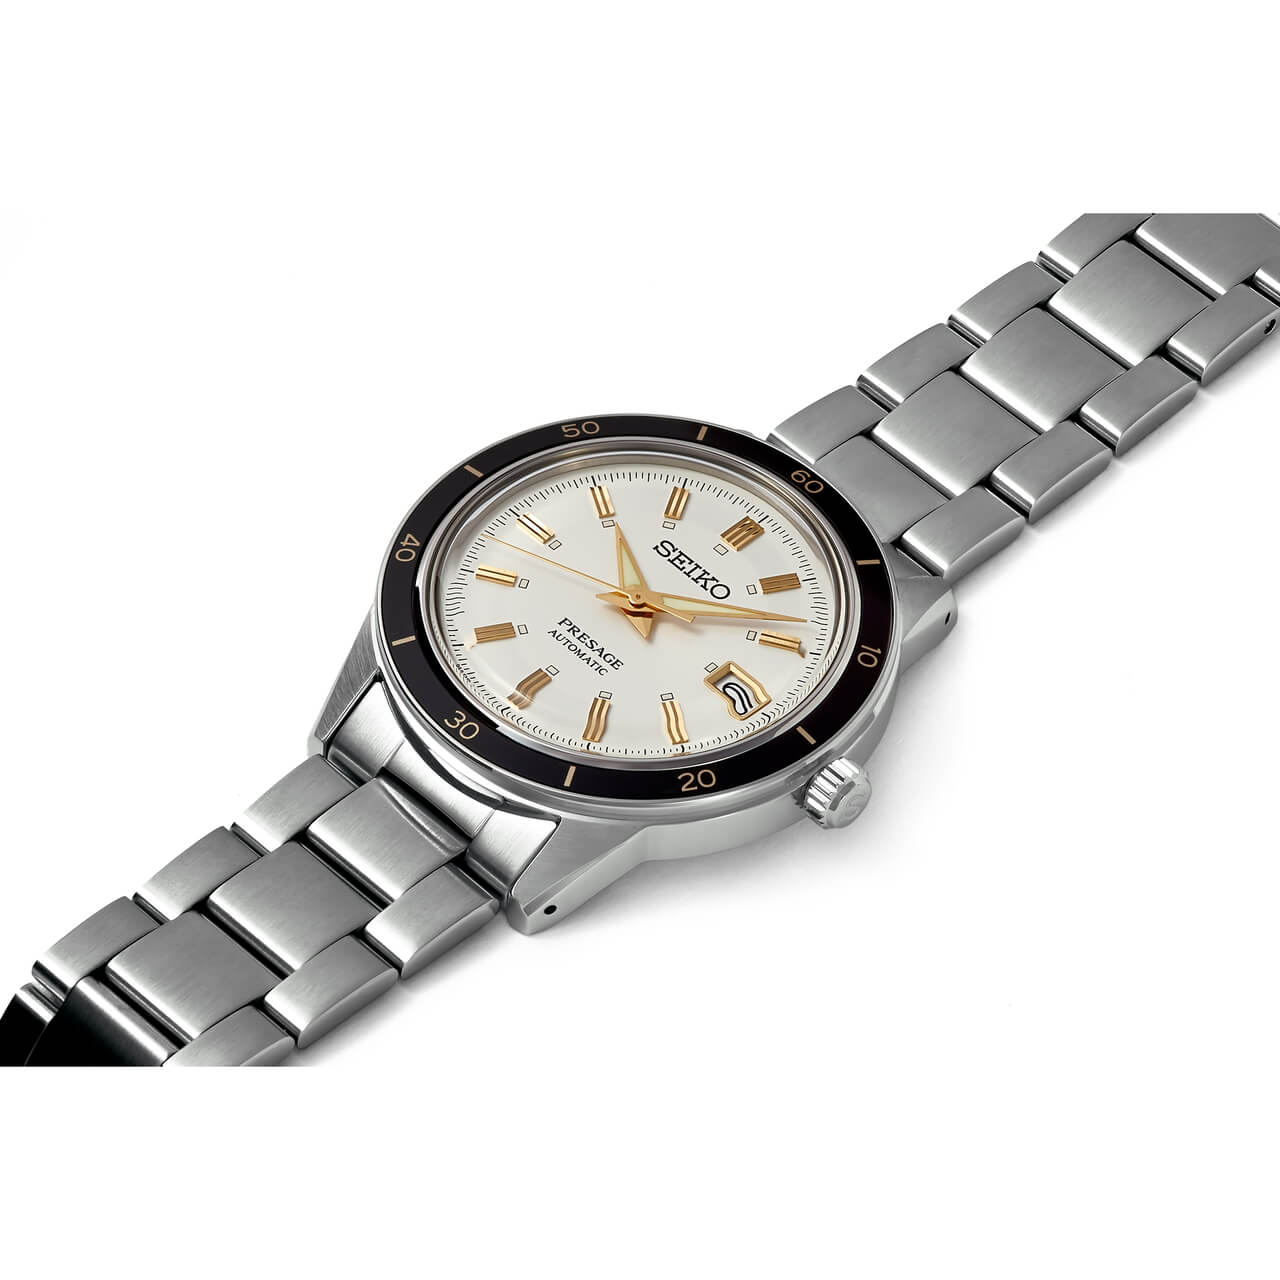 Seiko Presage Automatic Men's Watch SRPG03 - Obsessions Jewellery